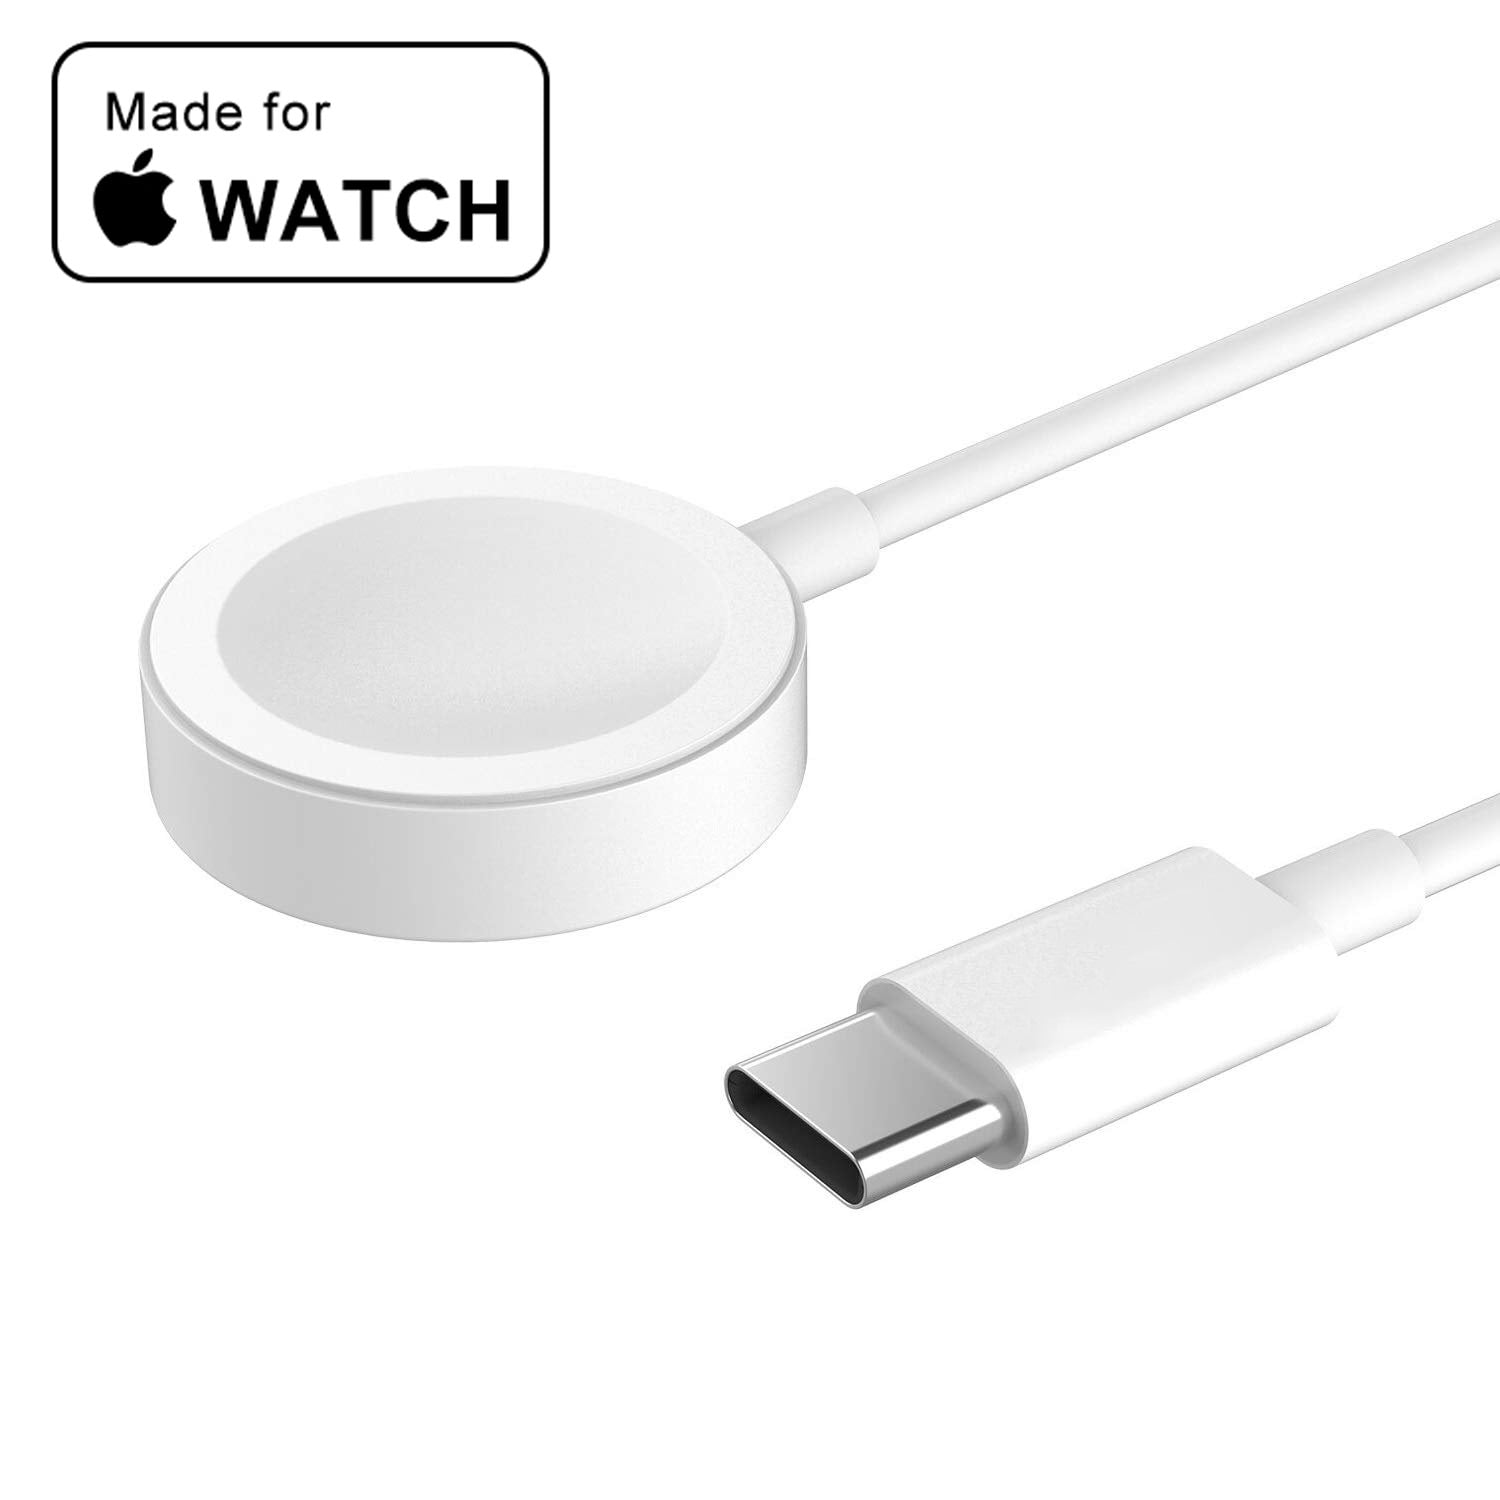 Watch Charger,Magnetic Watch Wireless Charger Watch Charging Cable for Apple Watch Series 5/4/3/2/1,38mm,40mm,42mm,44mm - Walmart.com